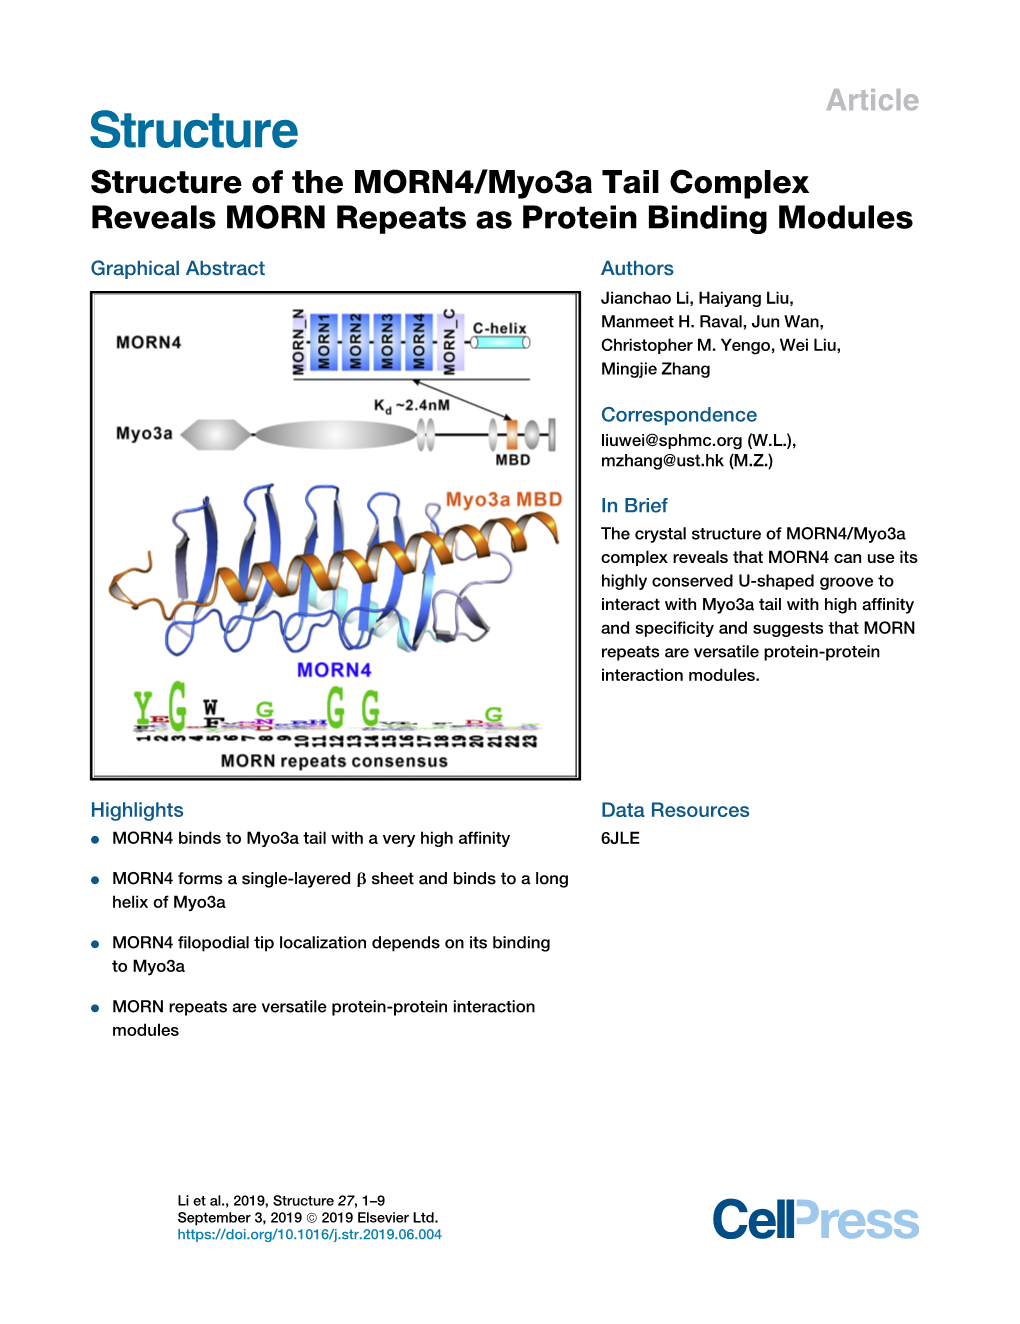 Structure of the MORN4/Myo3a Tail Complex Reveals MORN Repeats As Protein Binding Modules